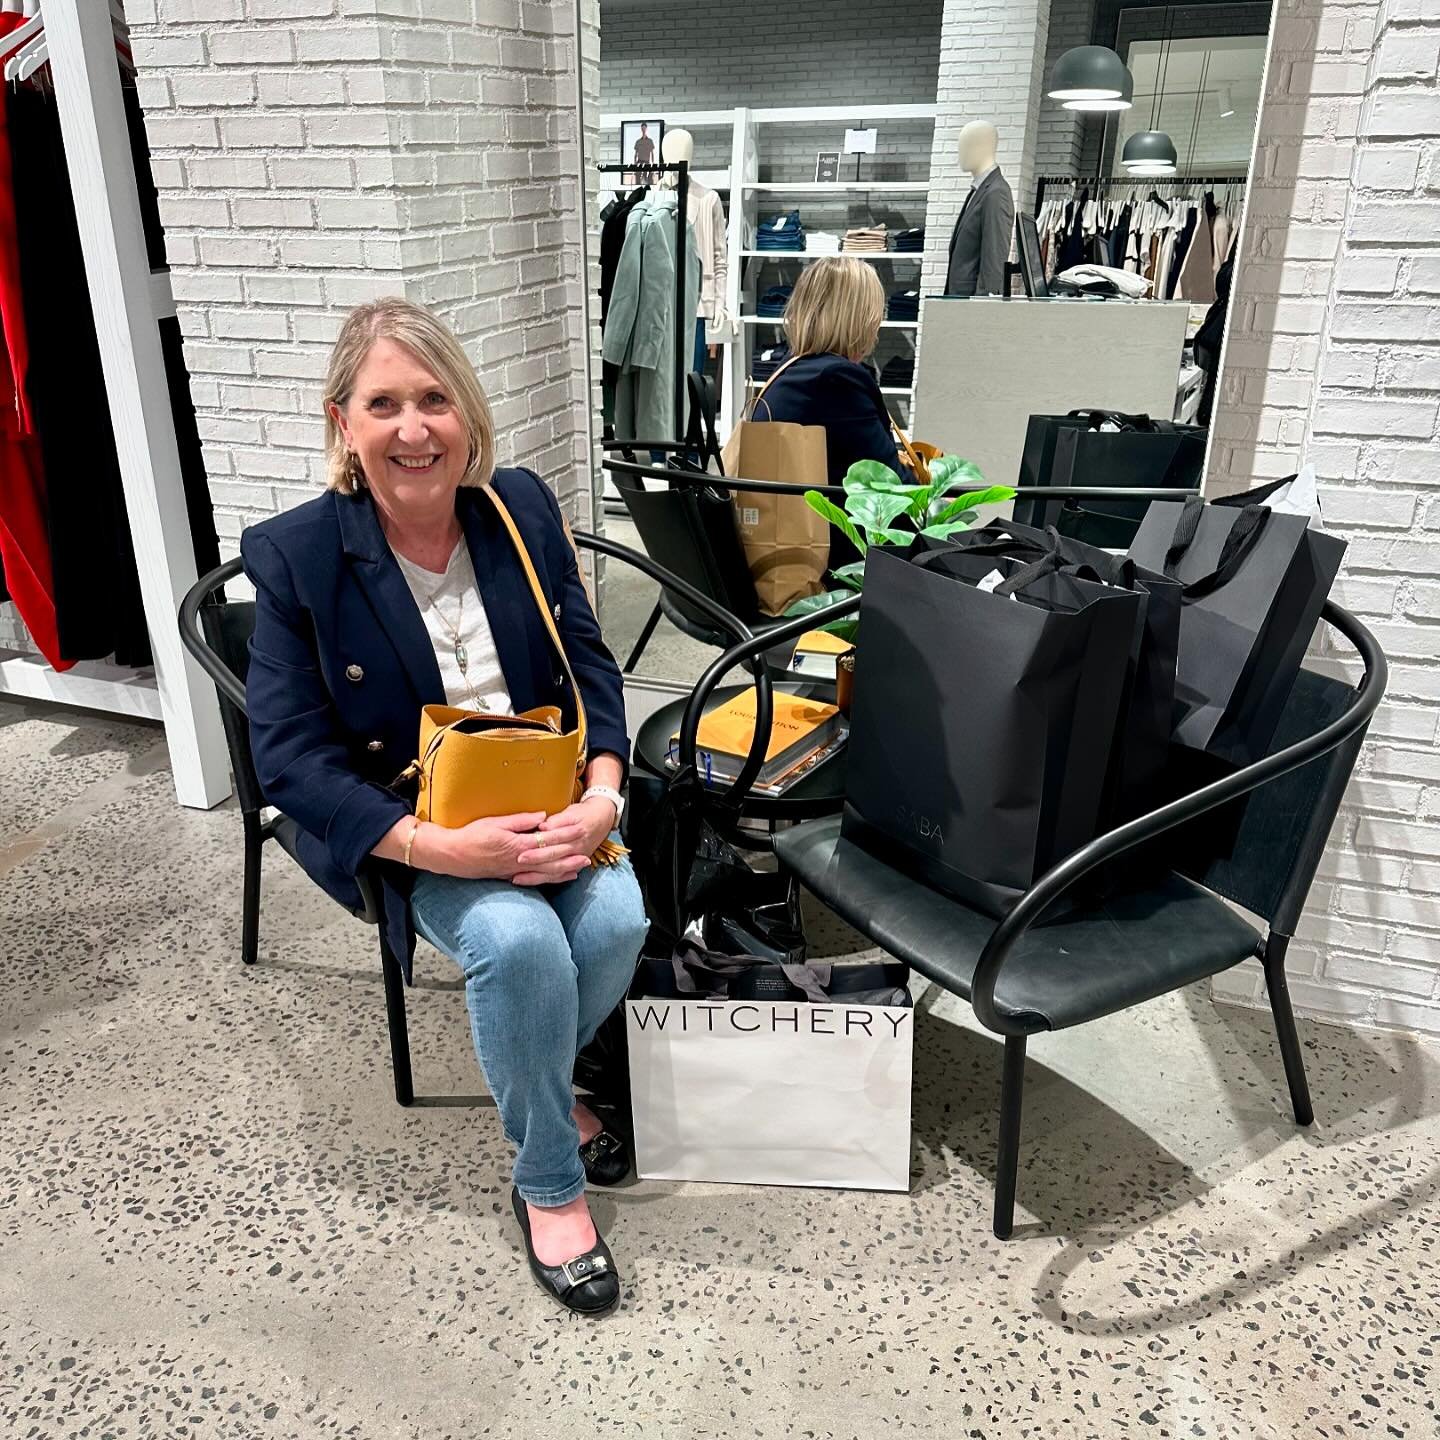 &bull; P E R S O N A L - S H O P P I N G &bull;
#styledbyjade #personalshoppingservice #melbournestylist 

SO MUCH JOY!!!! 

Today I had the absolute pleasure of meeting a new client for a day of Personal Shopping at Chadstone. 

Anne is a gorgeous w